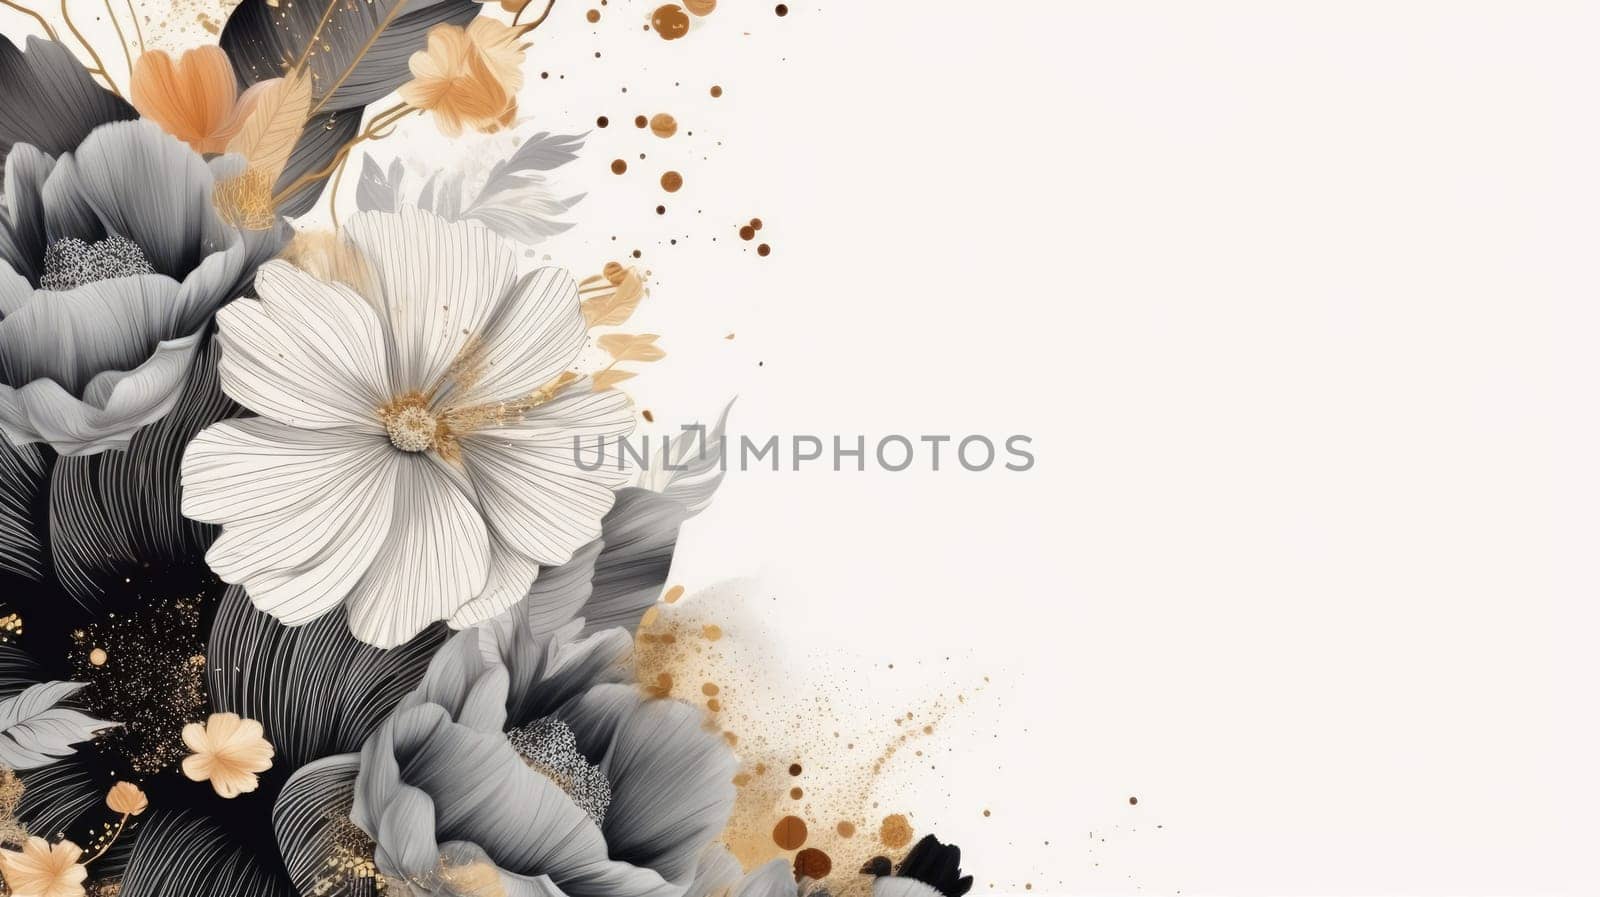 Watercolor abstract design for background wedding or buzzy social media banner by biancoblue